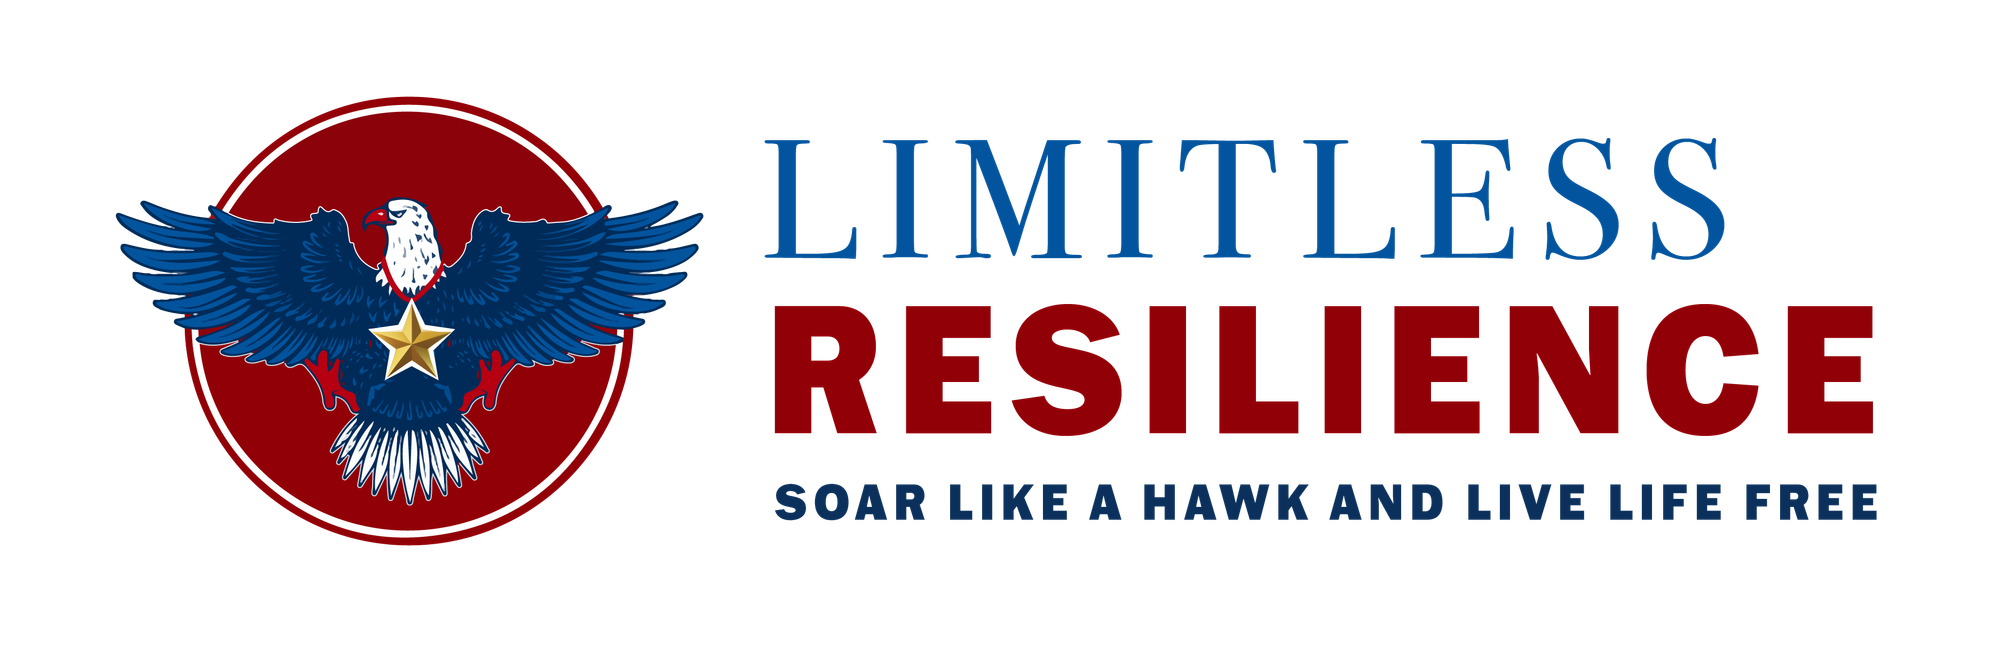 LIMITLESS Resilience